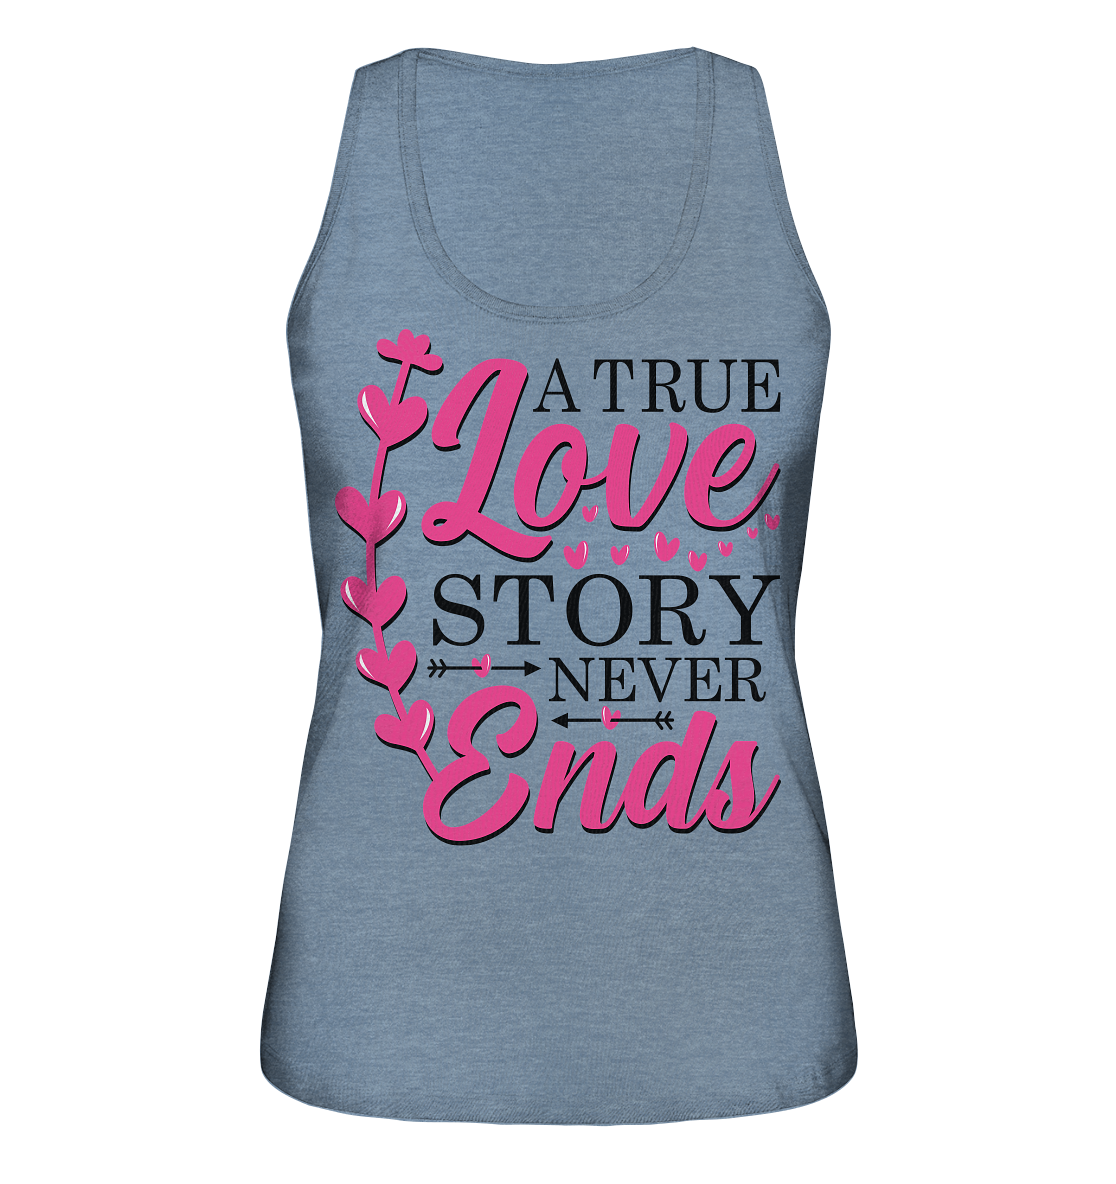 A True Love Story Never Ends - Ladies Organic Tank-Top